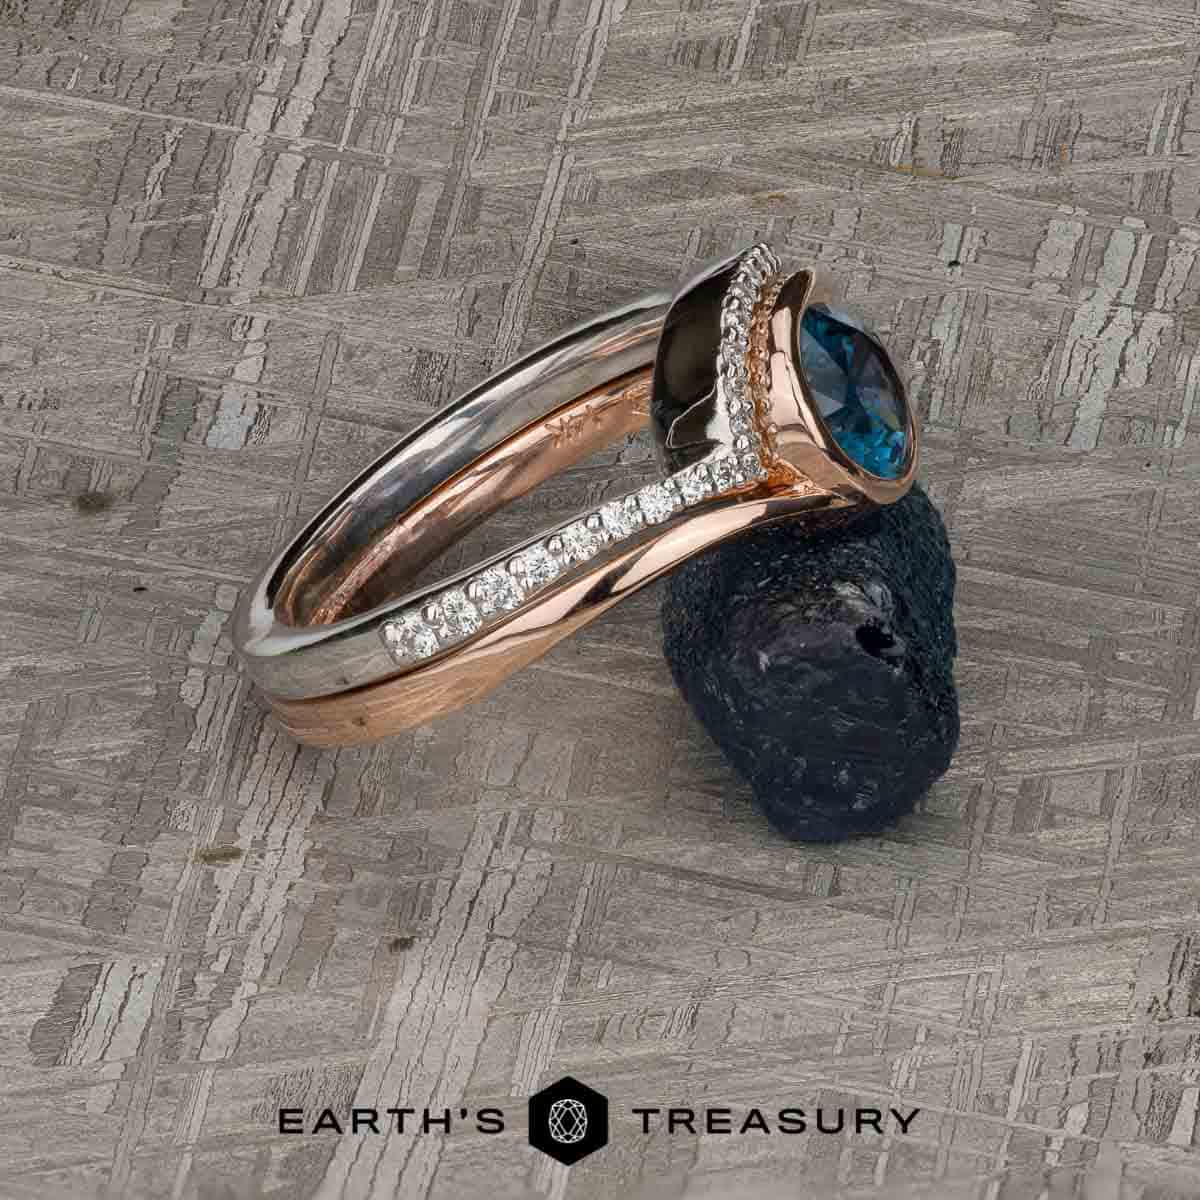 The "Calliste" Solitaire in 14k rose gold with 1.10-Carat Montana Sapphire, alongside the "Calliste" band in 14k white gold